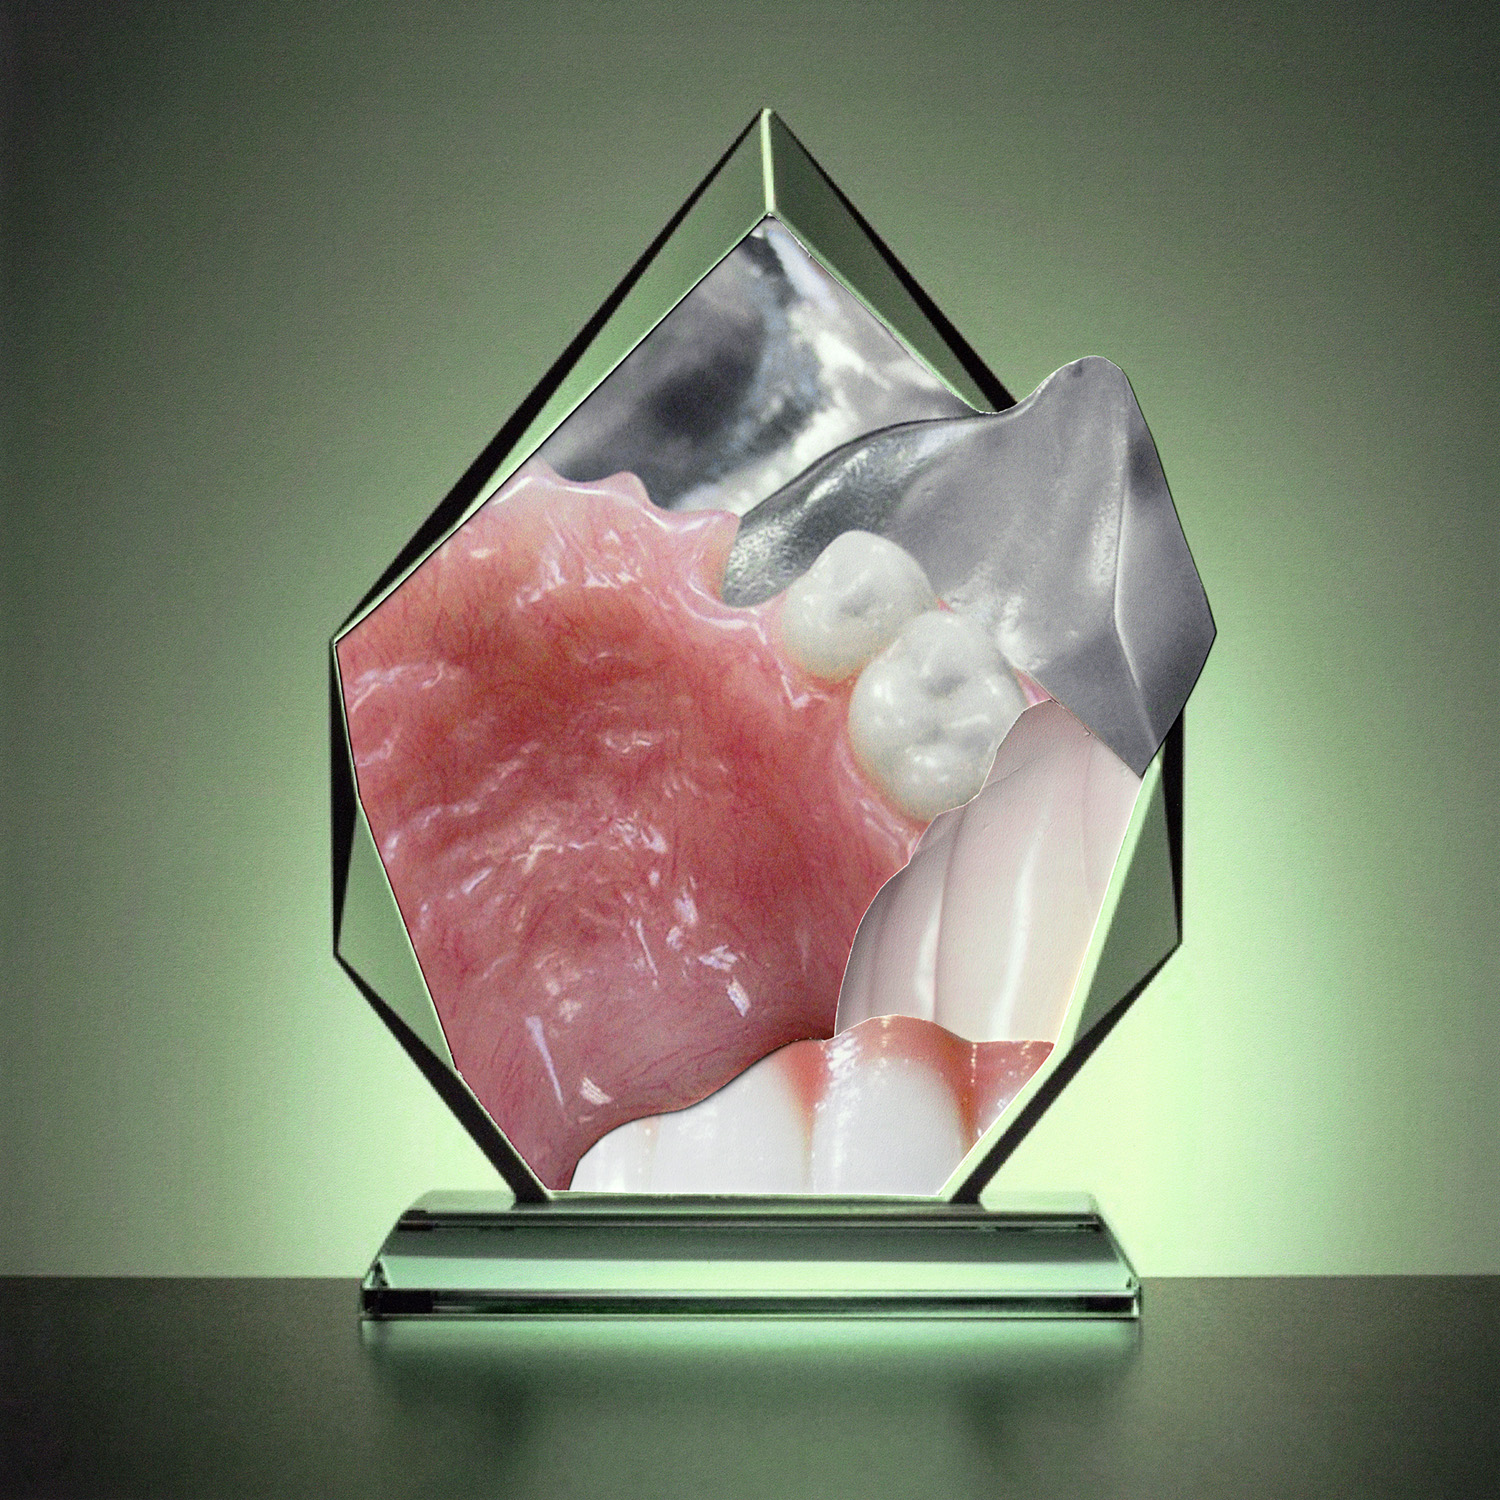 Color photographic collage showing a green-tinged glass paperweight containing collaged images of human teeth and gums.